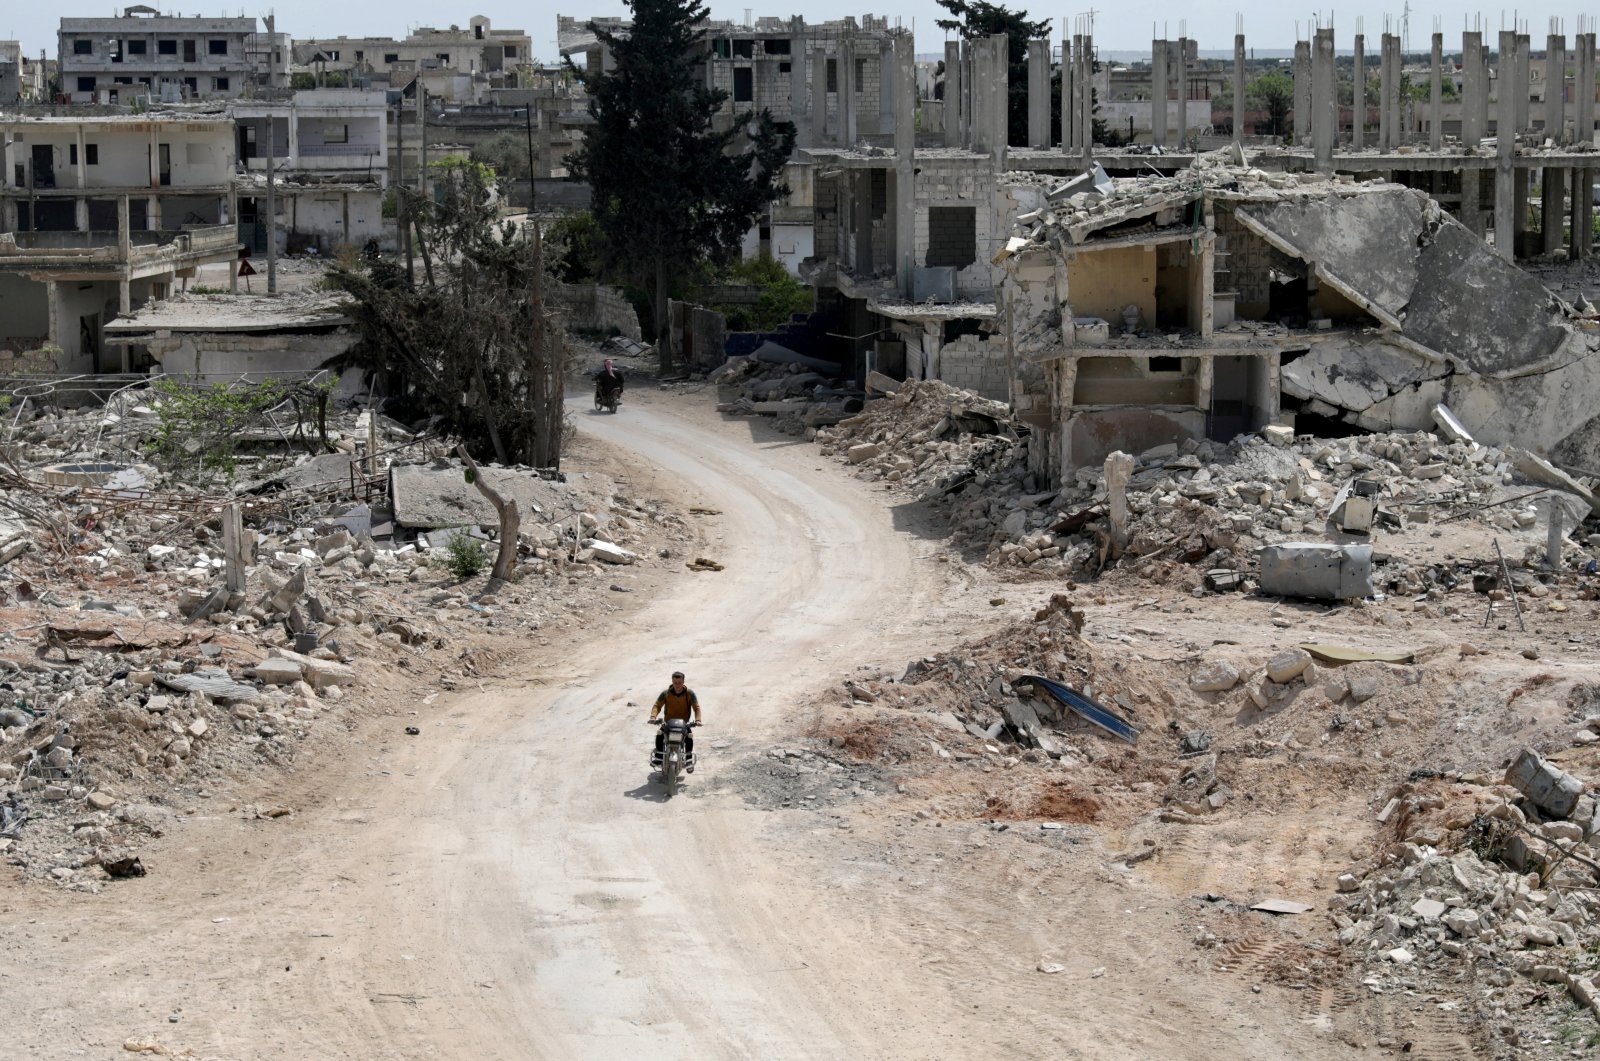 A man rides a motorbike past damaged buildings in the opposition-held town of Nairab, in the Idlib region of Syria, April 17, 2020. (Reuters Photo)